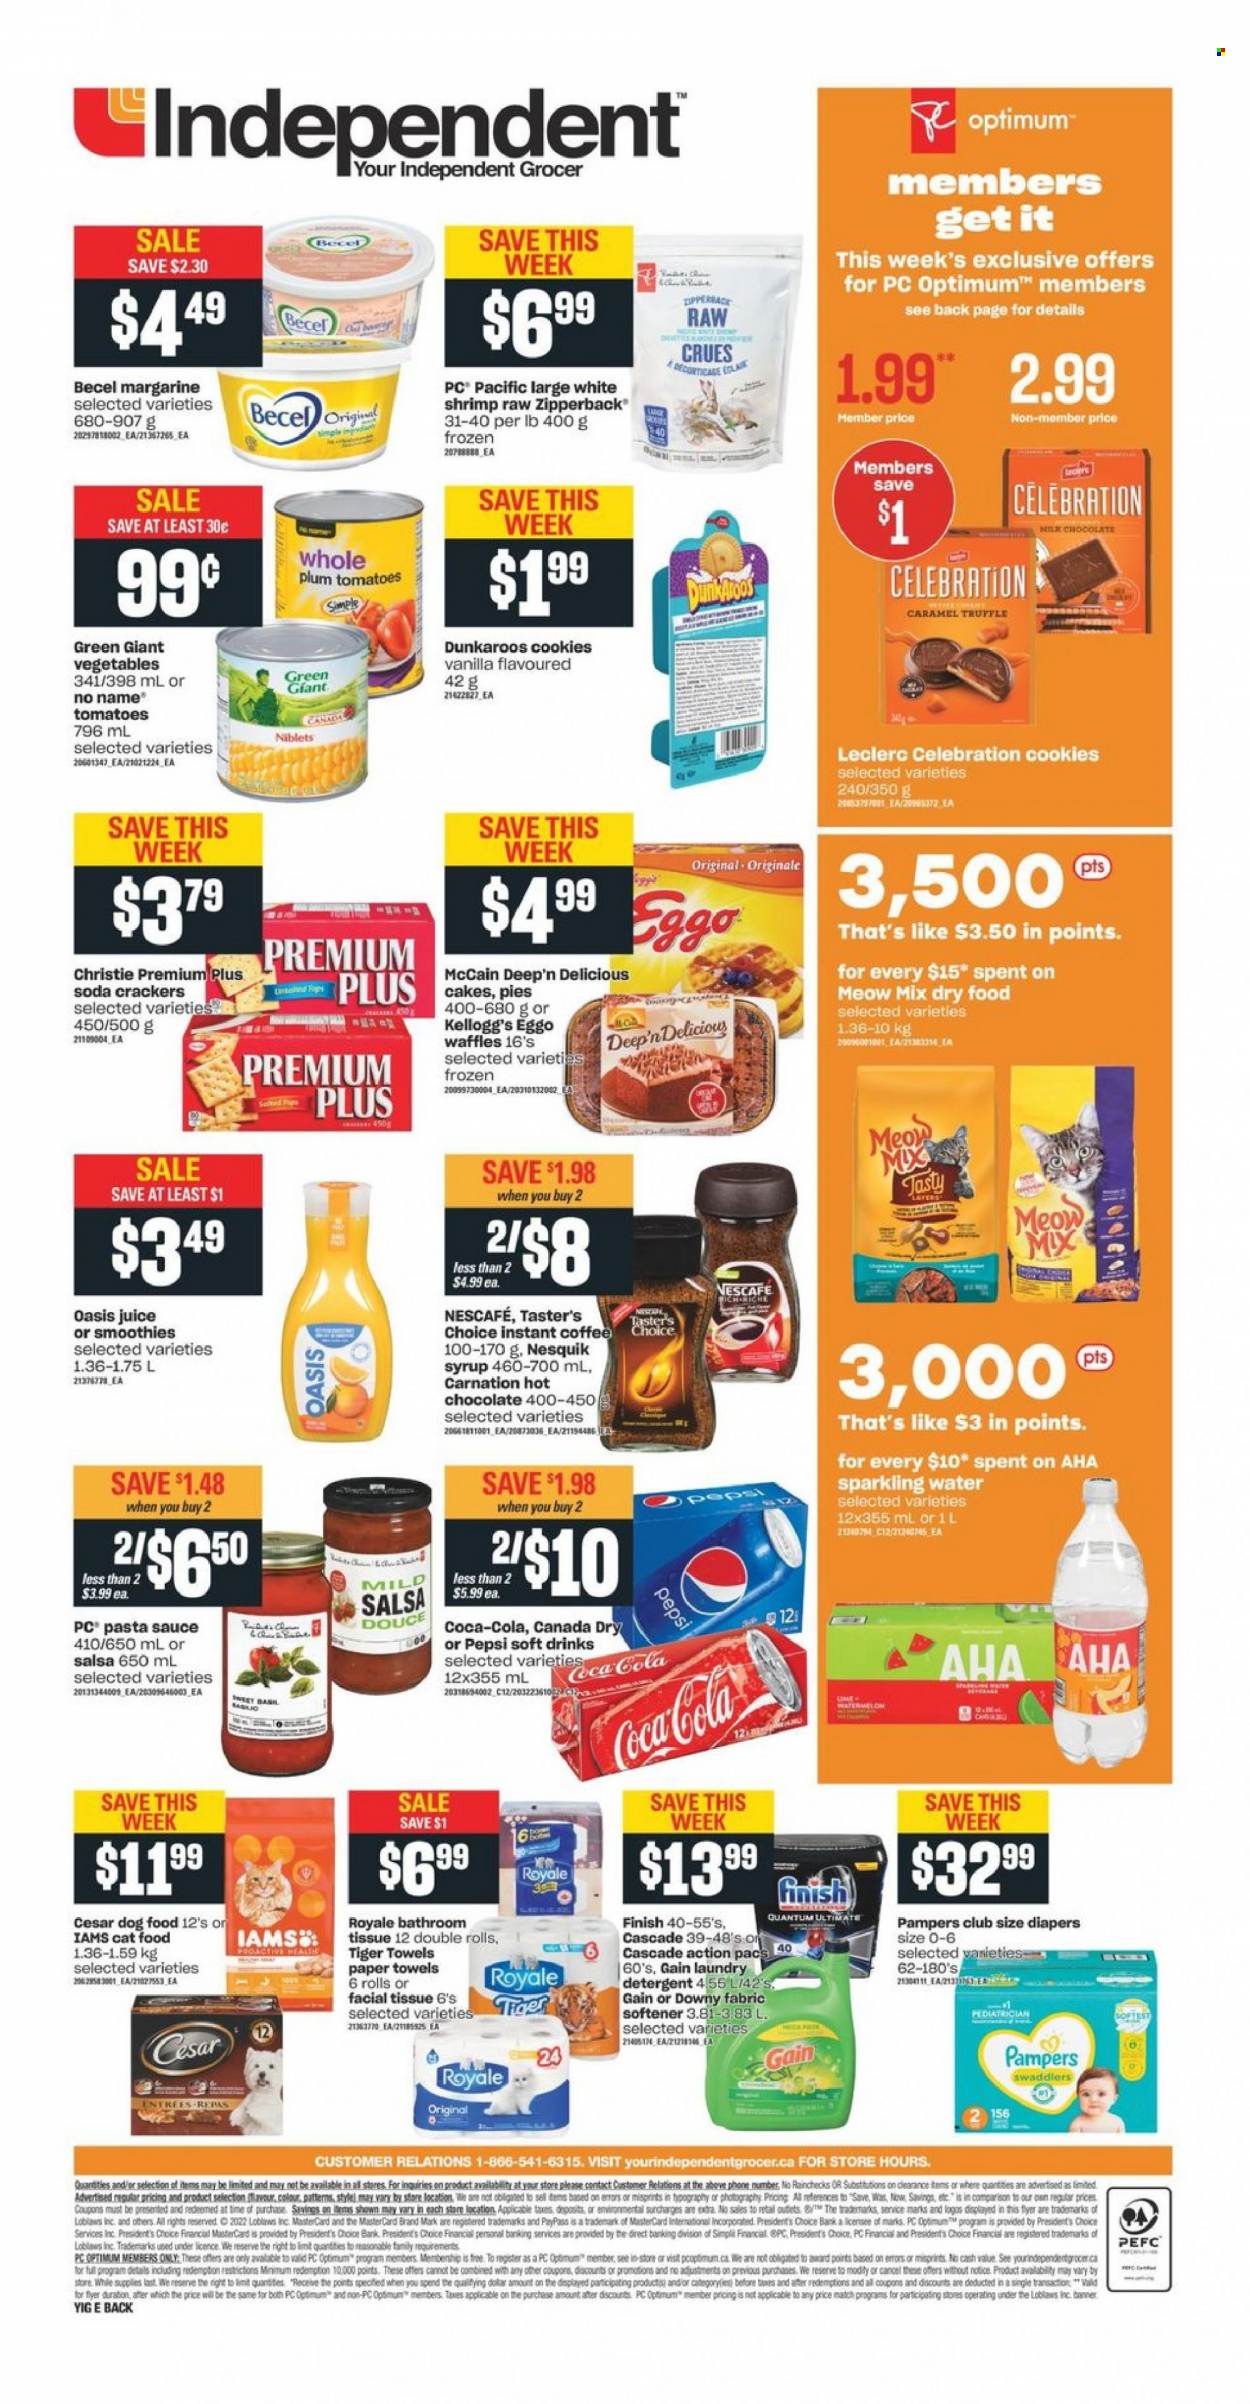 thumbnail - Independent Flyer - January 13, 2022 - January 19, 2022 - Sales products - cake, waffles, tomatoes, watermelon, shrimps, No Name, pasta sauce, sauce, Président, margarine, McCain, cookies, truffles, Celebration, crackers, Kellogg's, salsa, syrup, Canada Dry, Coca-Cola, Pepsi, juice, soft drink, soda, sparkling water, hot chocolate, instant coffee, nappies, bath tissue, kitchen towels, paper towels, Gain, fabric softener, laundry detergent, Cascade, Downy Laundry, animal food, cat food, dog food, Optimum, Meow Mix, Iams, Nesquik, detergent, Pampers, Nescafé. Page 2.